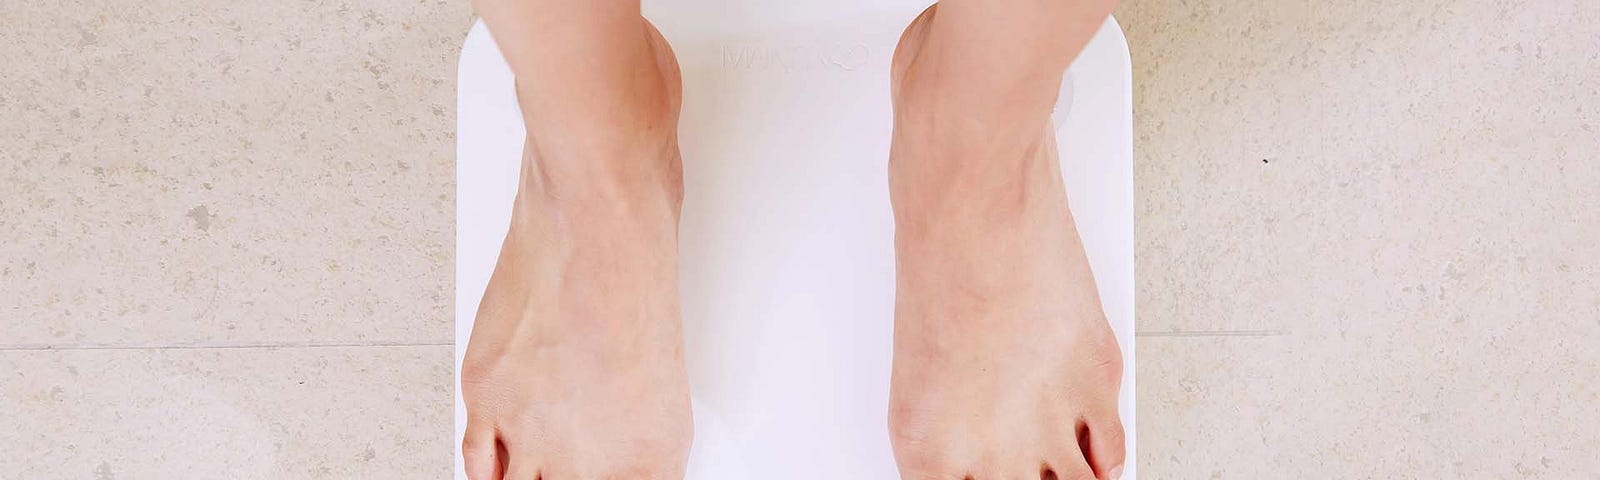 Looking down at a person’s feet on a scale.